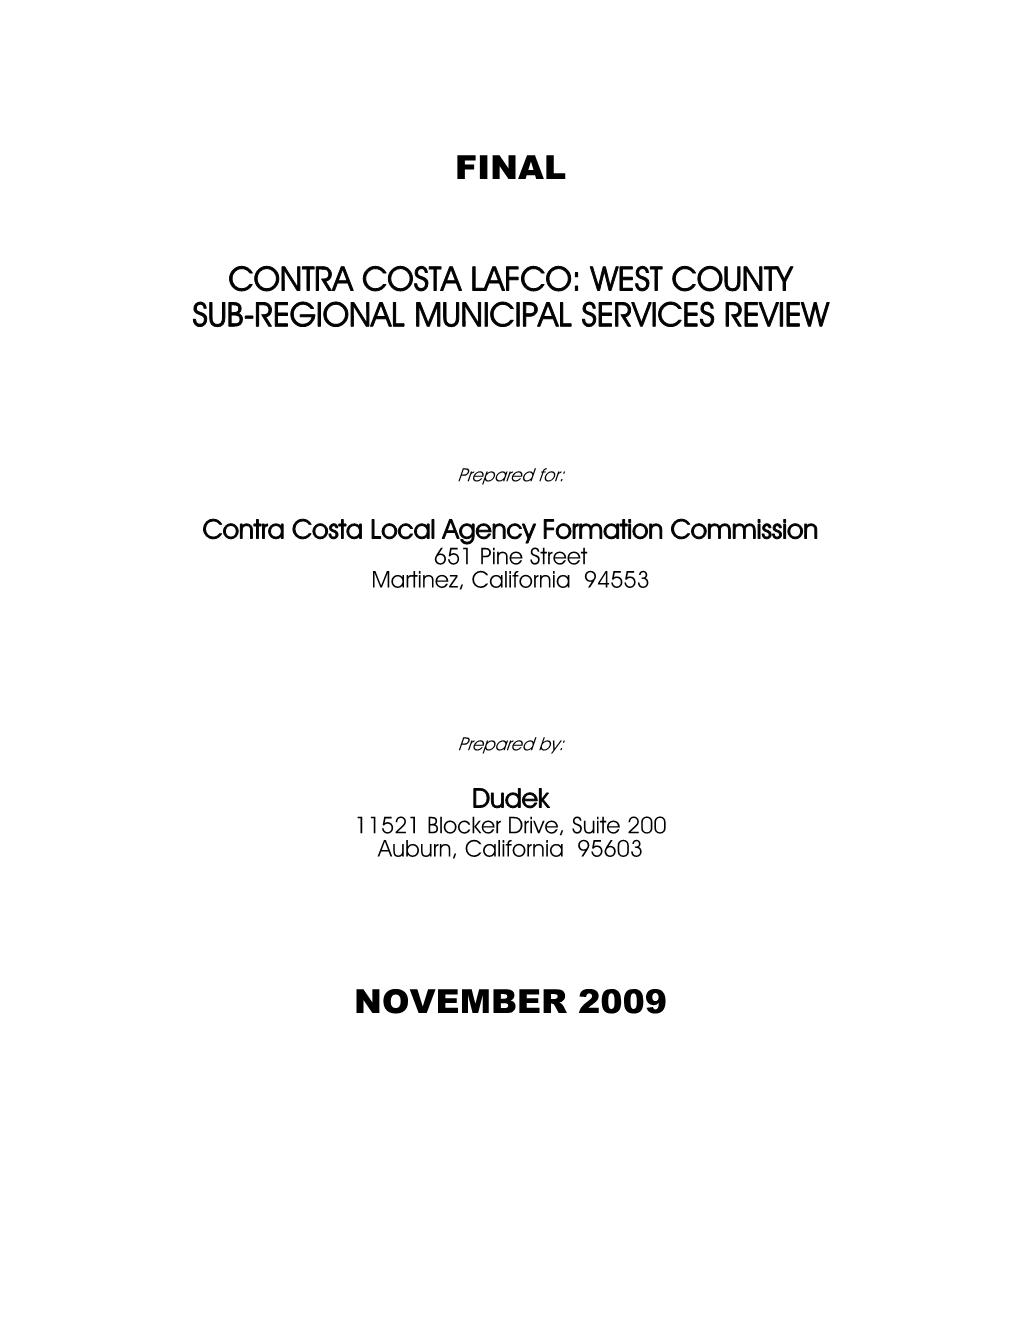 West County Sub-Regional Municipal Services Review